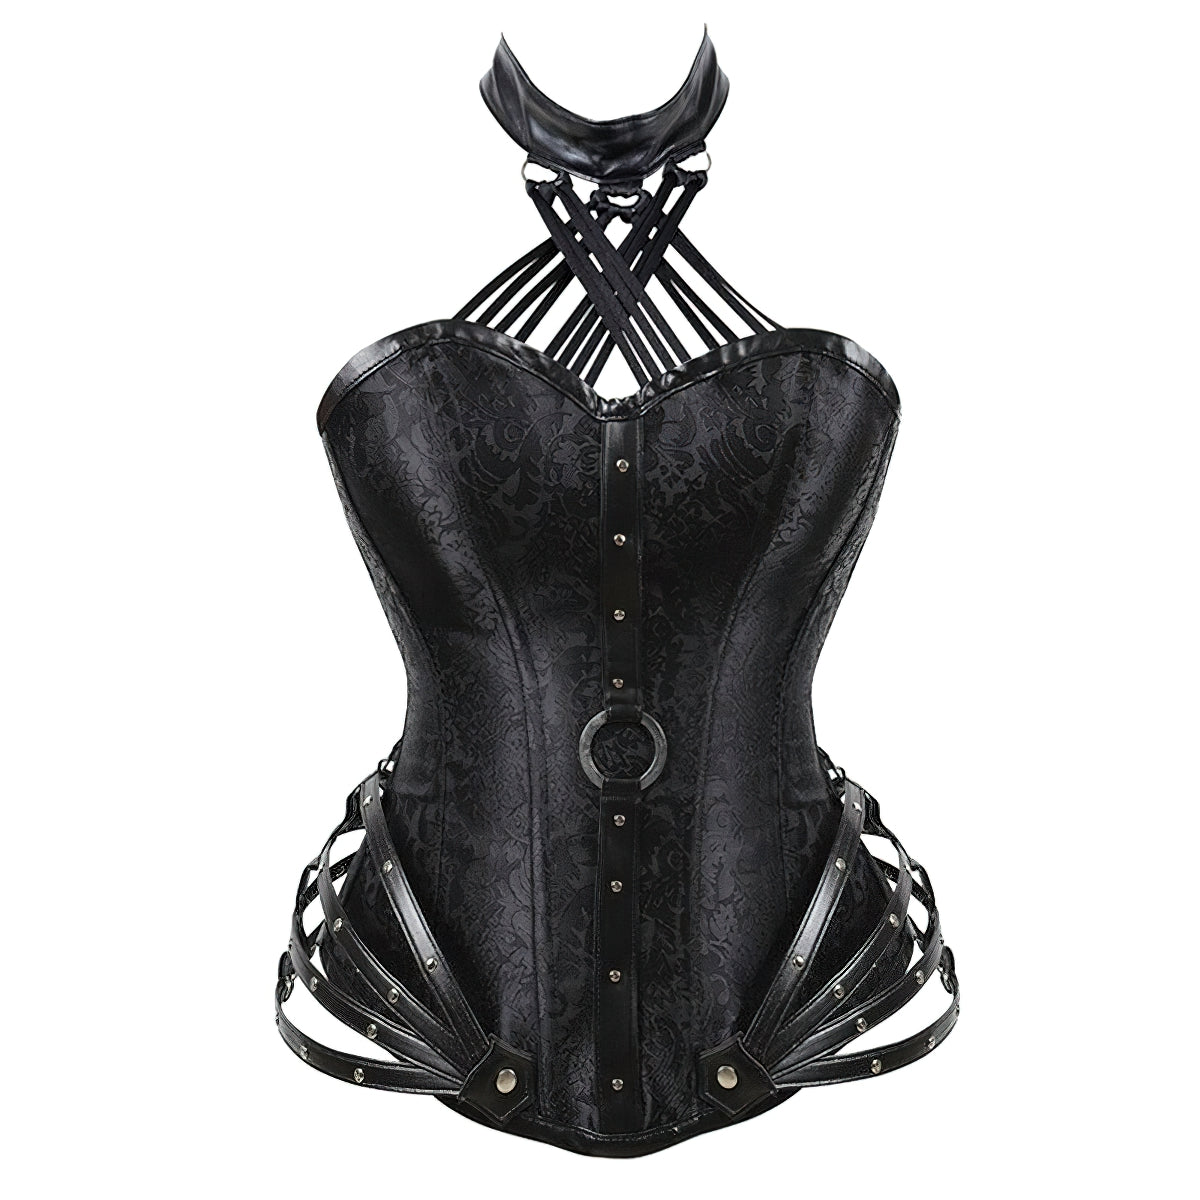 Steel Boned Steampunk Style Modeling Corset / Halter Bustiers / Faux Leather Lingerie With Collar